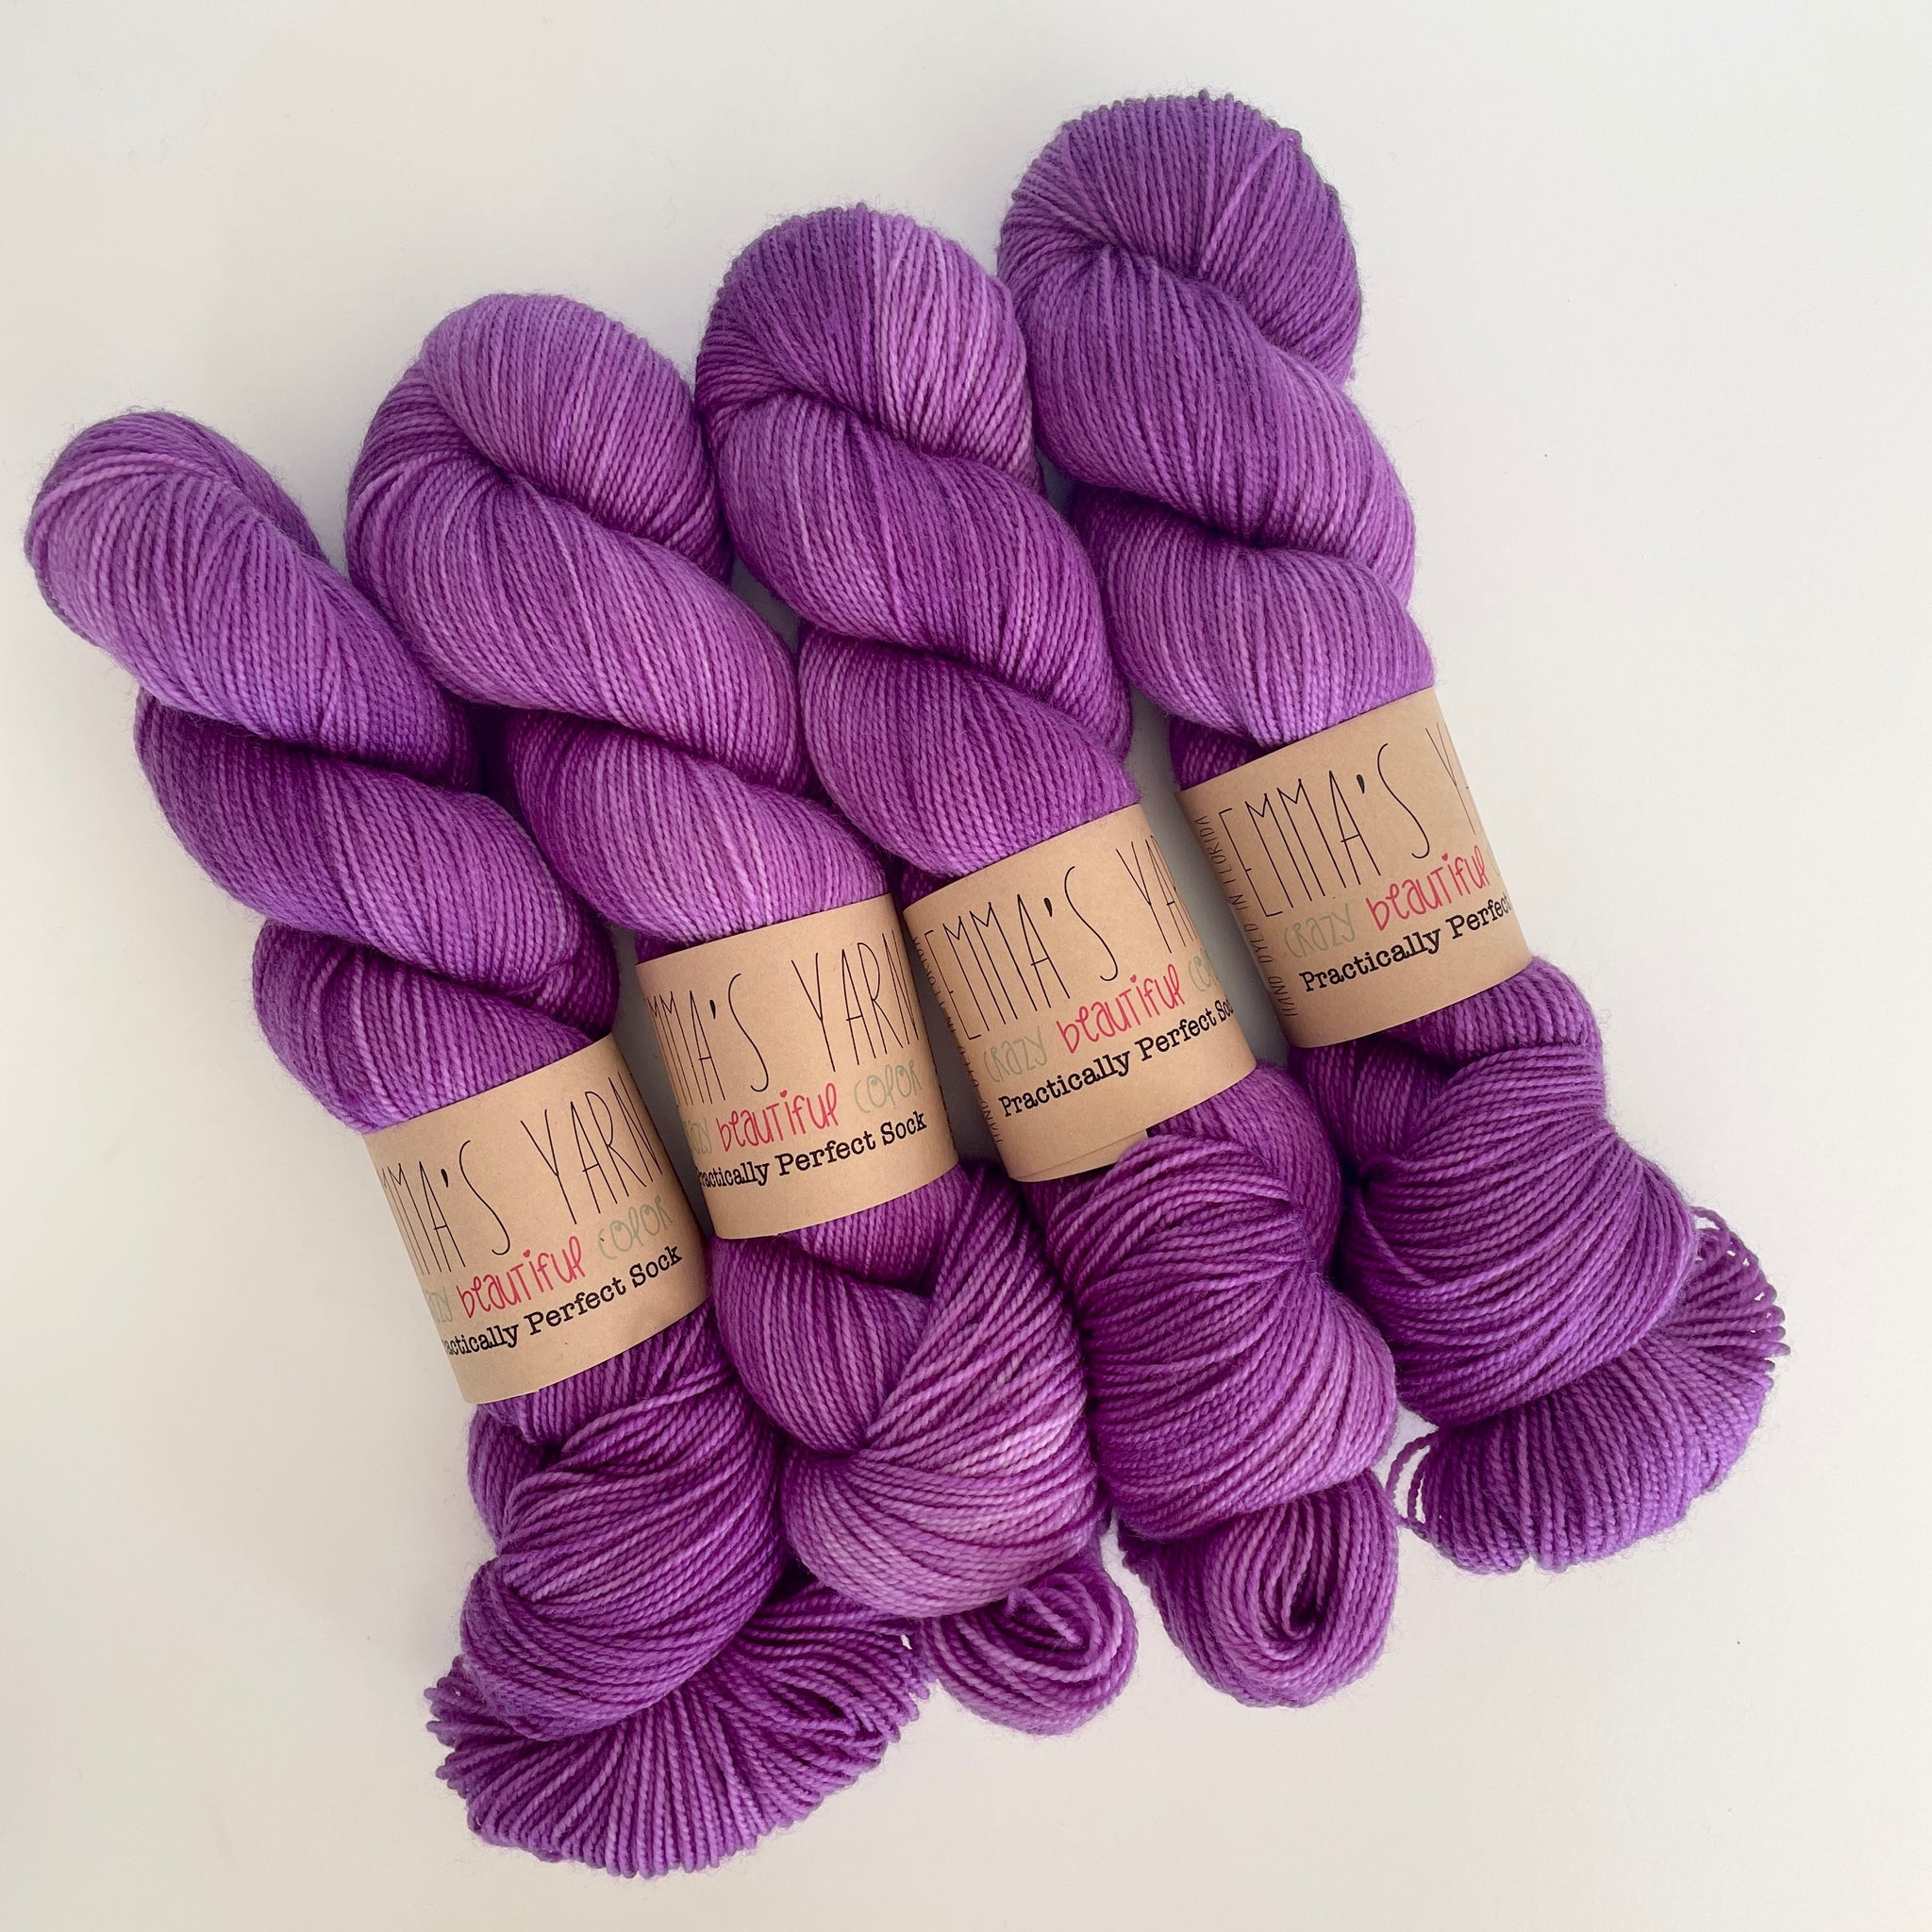 Grape To Meet You - Practically Perfect SMALLS (3)